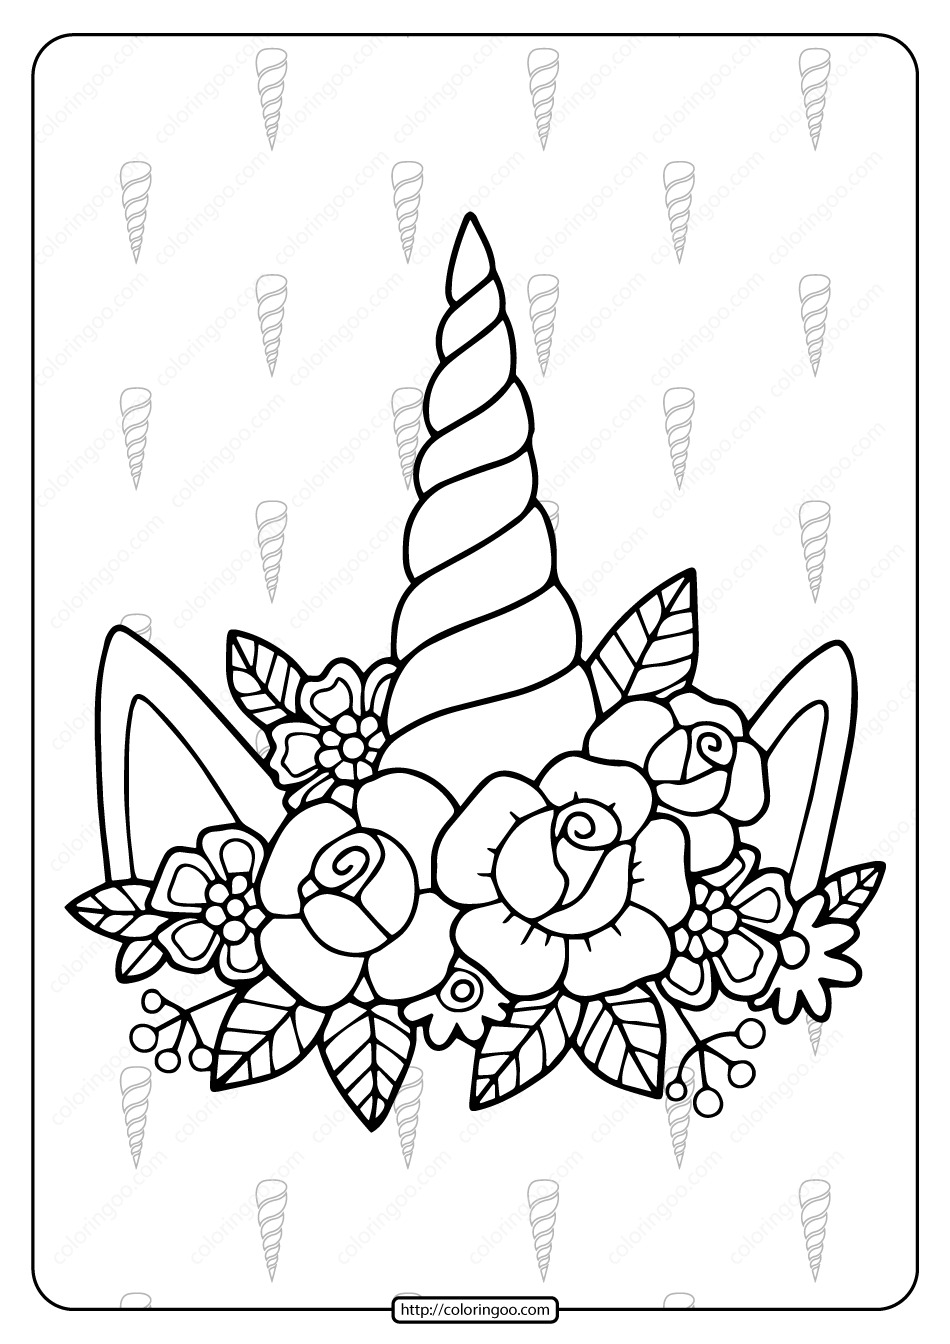 Printable unicorn horn and flowers coloring page unicorn coloring pages unicorn printables coloring pages